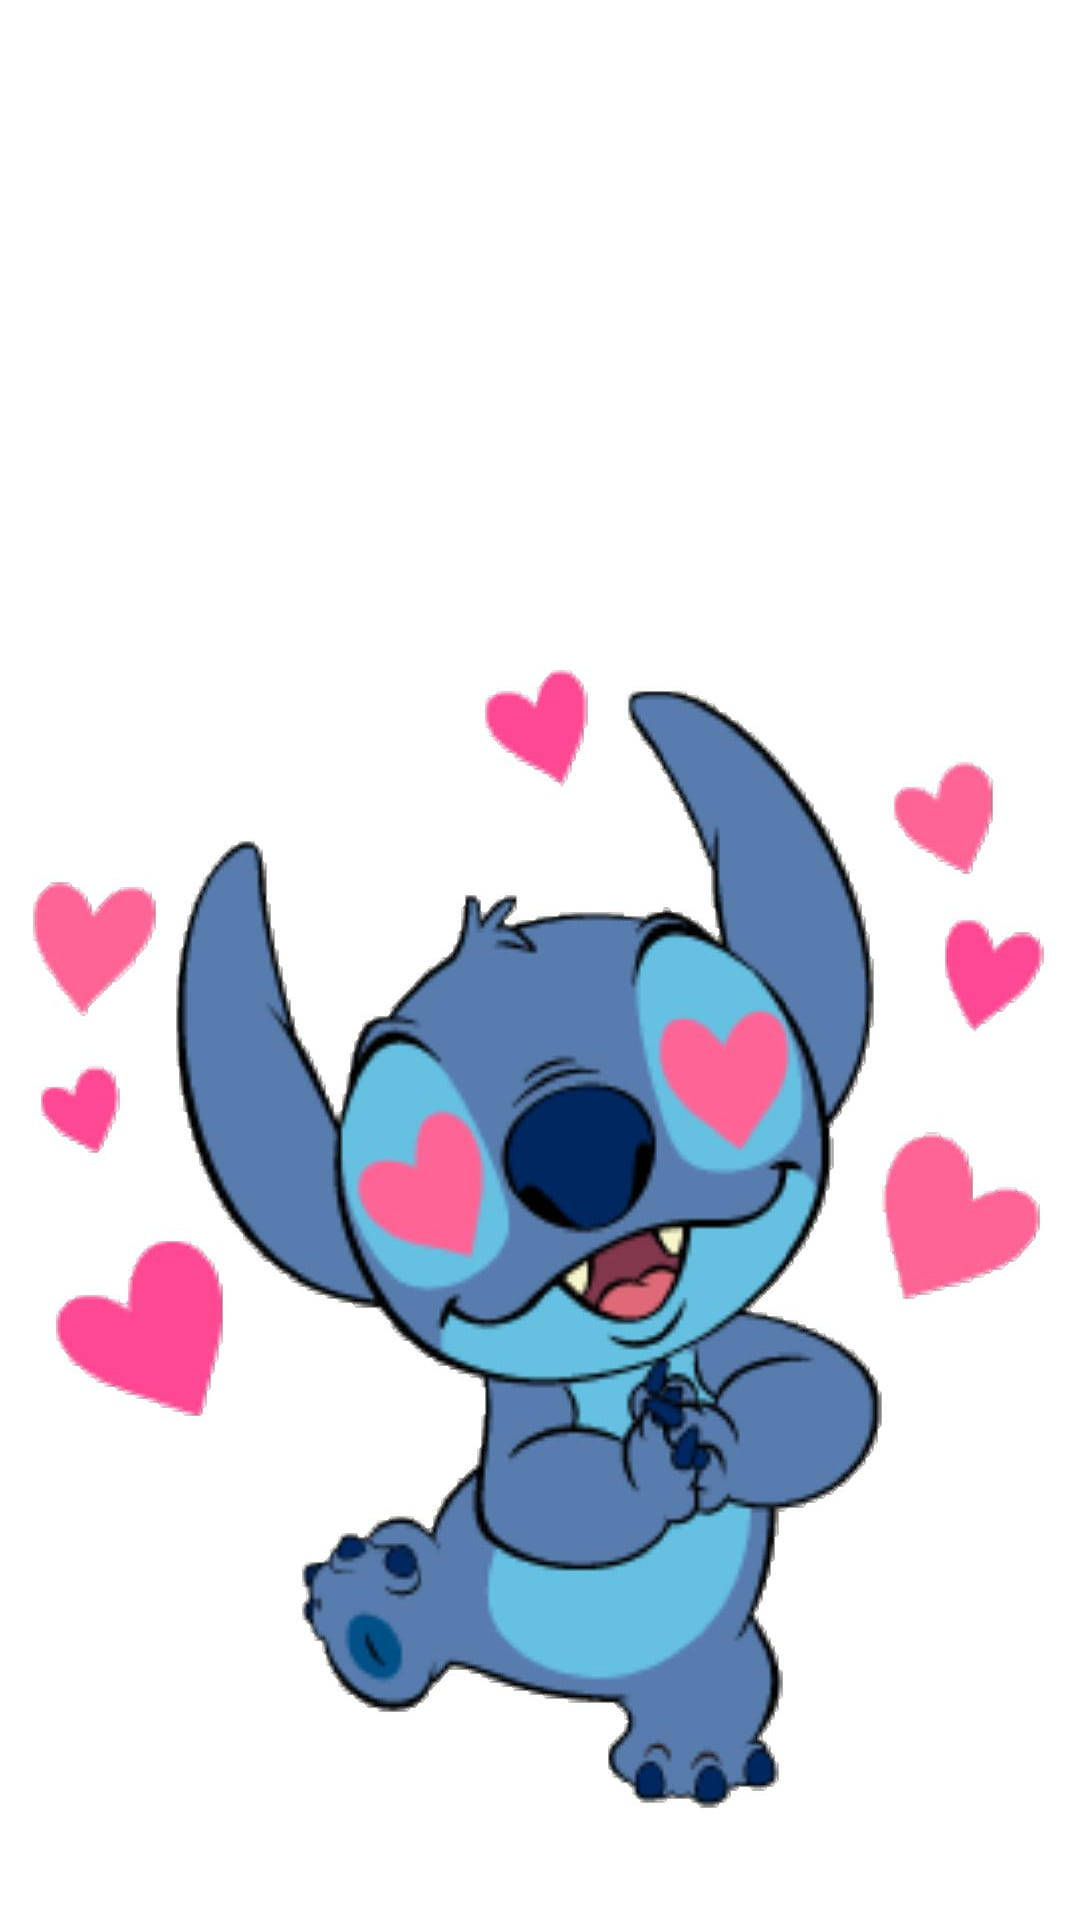 Download Stitch Disney With Heart Eyes Wallpaper | Wallpapers.com